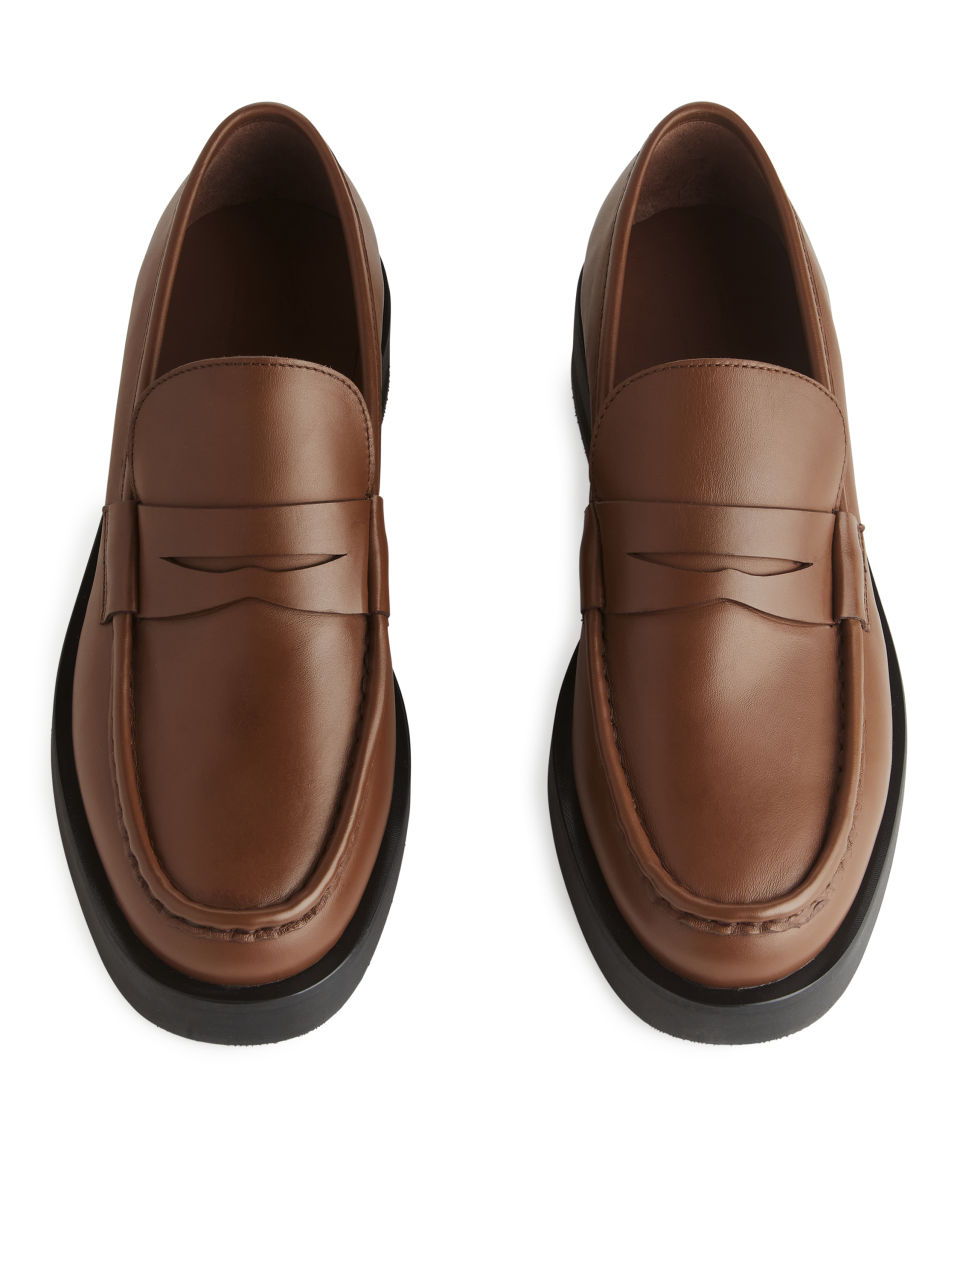 Arket Leather Penny Loafers